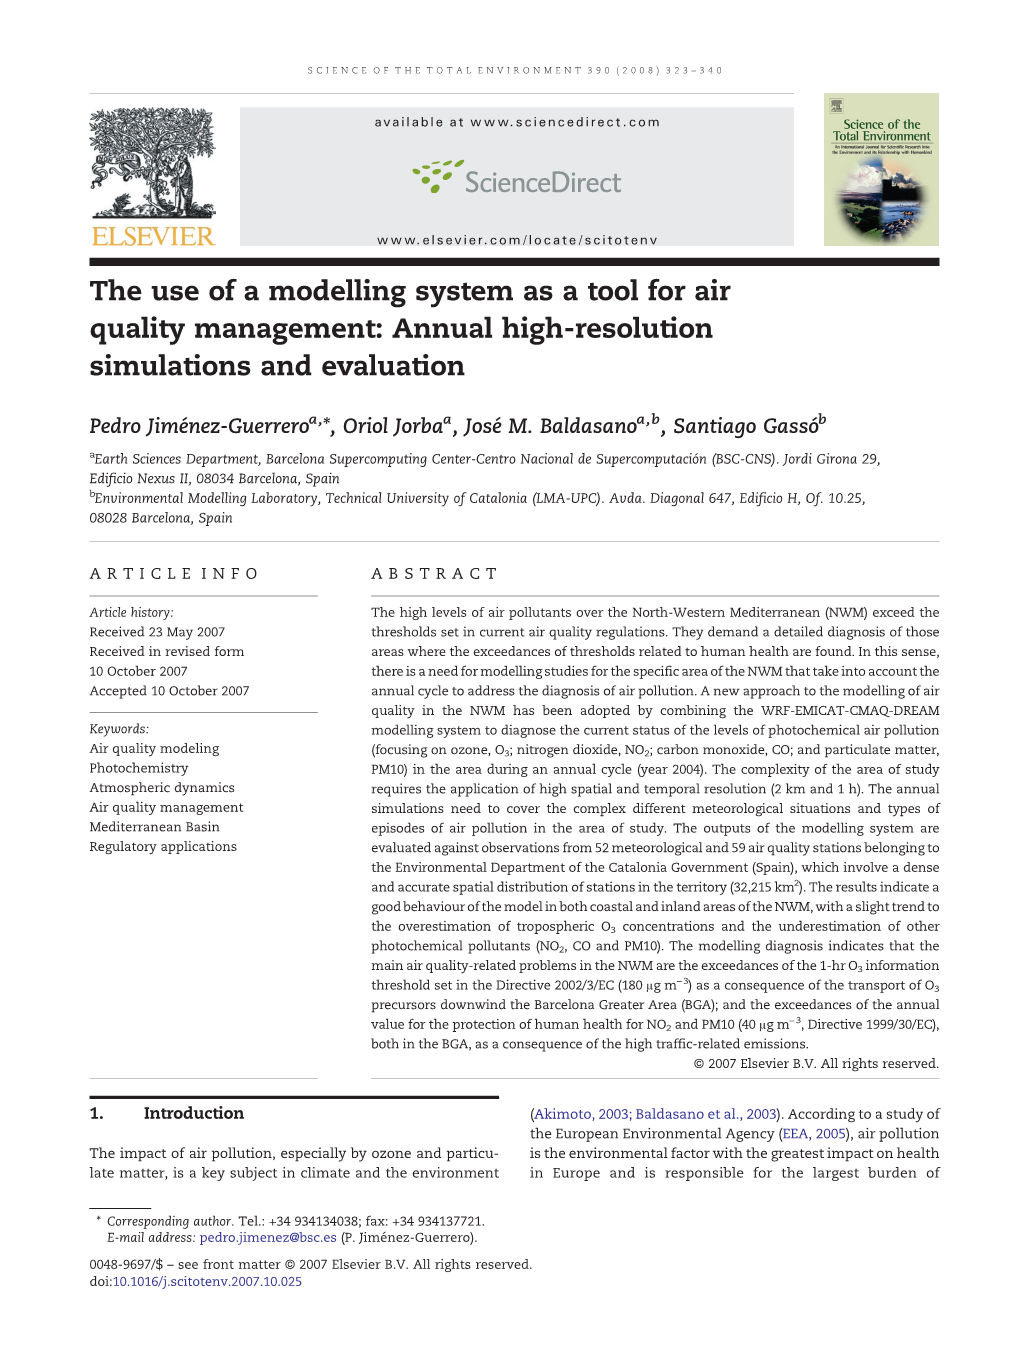 Annual High-Resolution Simulations and Evaluation